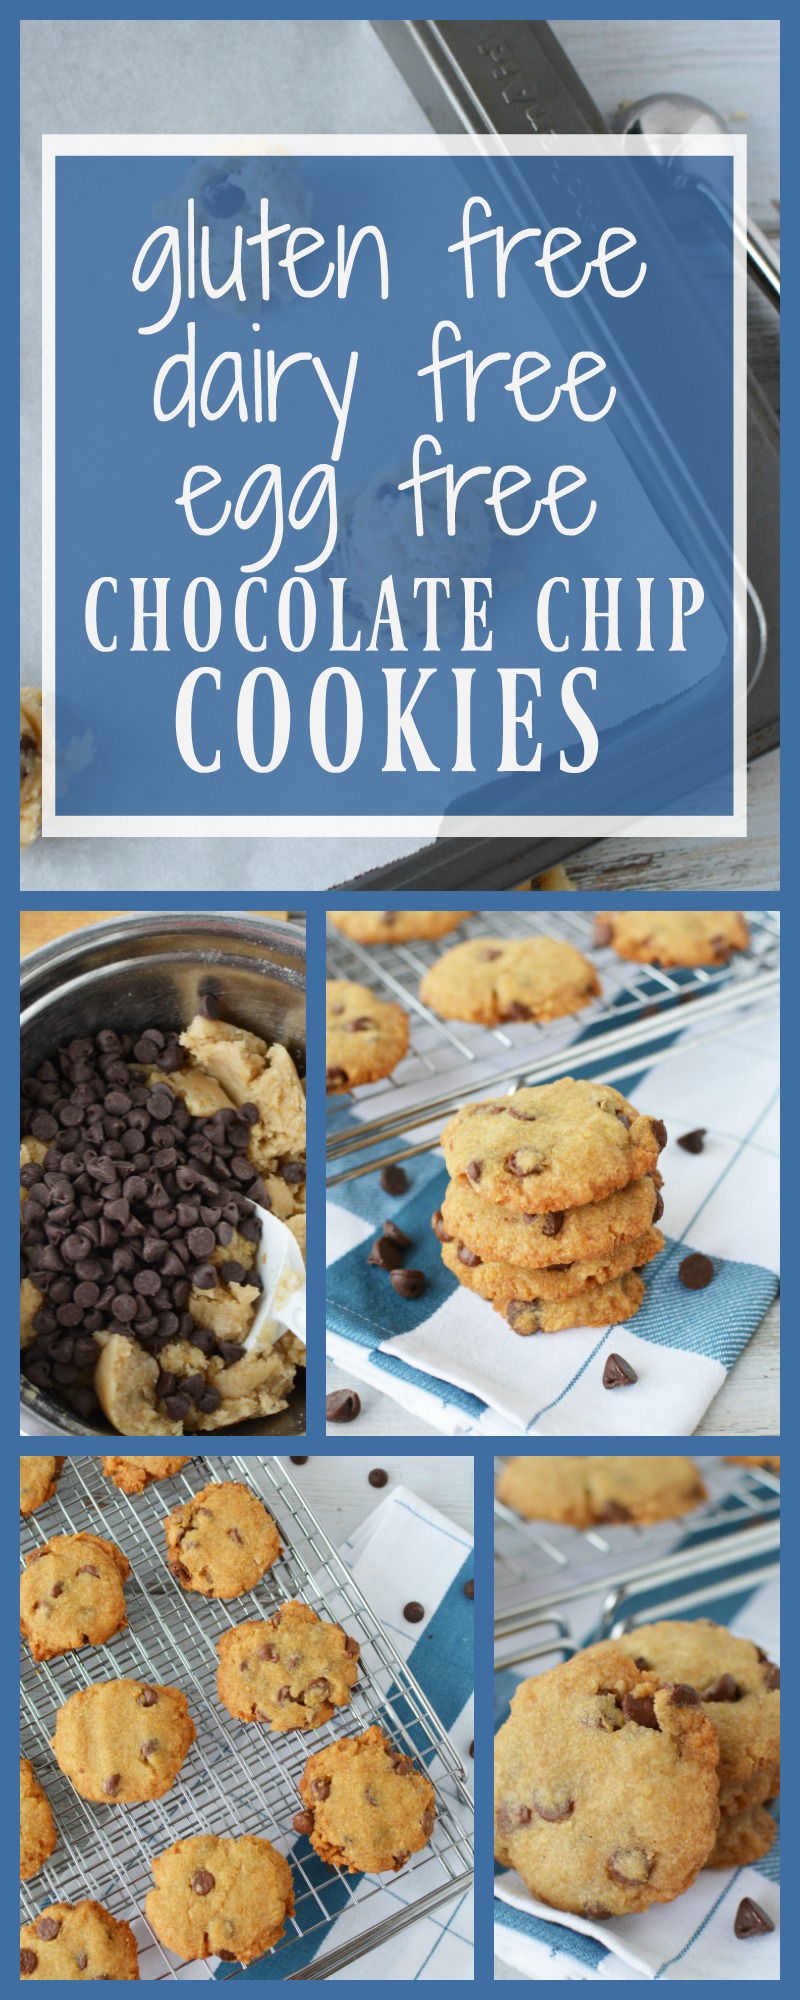 Gluten Free egg free chocolate chip cookies|RIpped Jeans and Bifocals